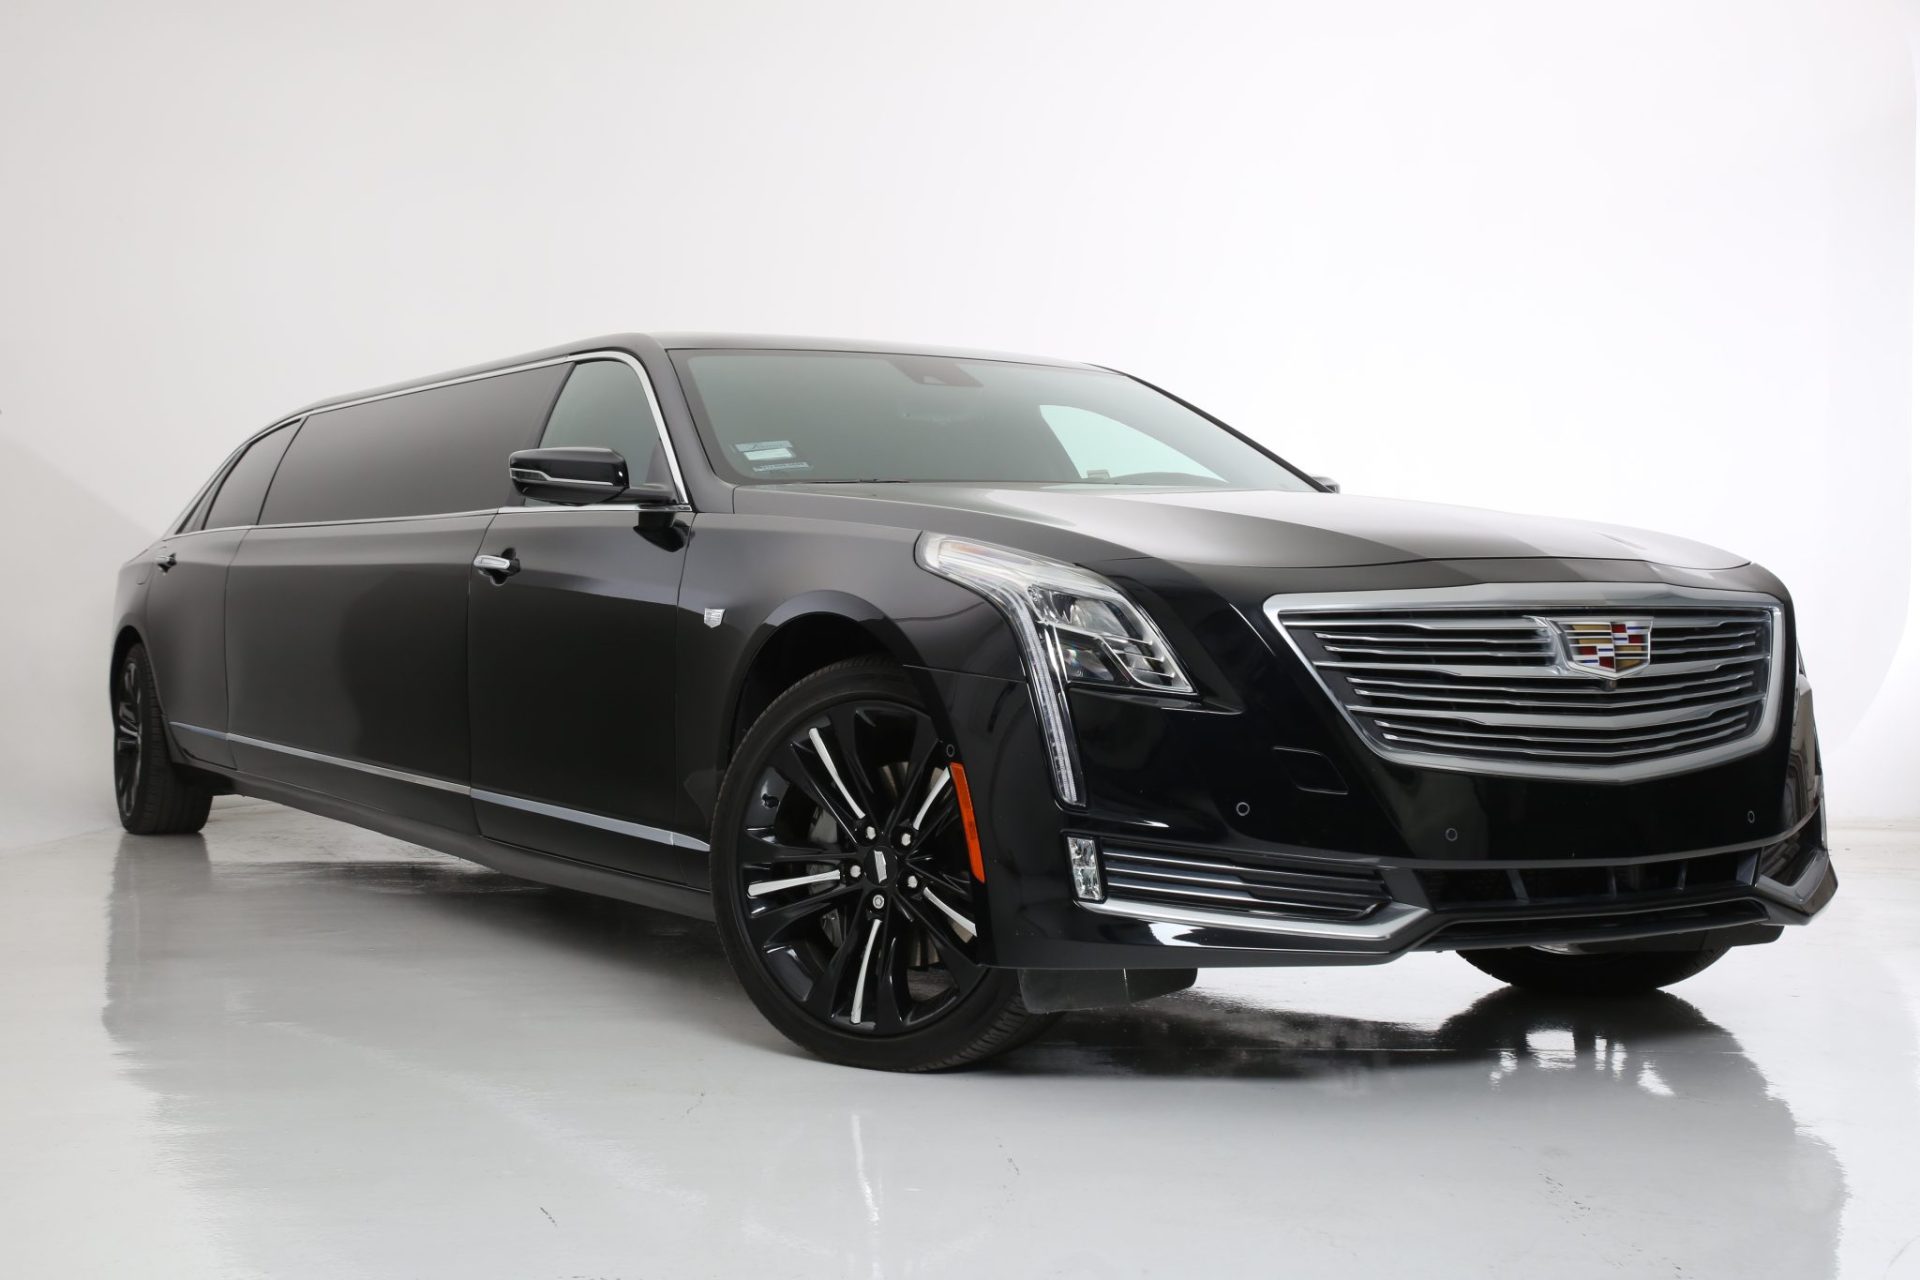 Stretched Cadillac CT6-V Limousine